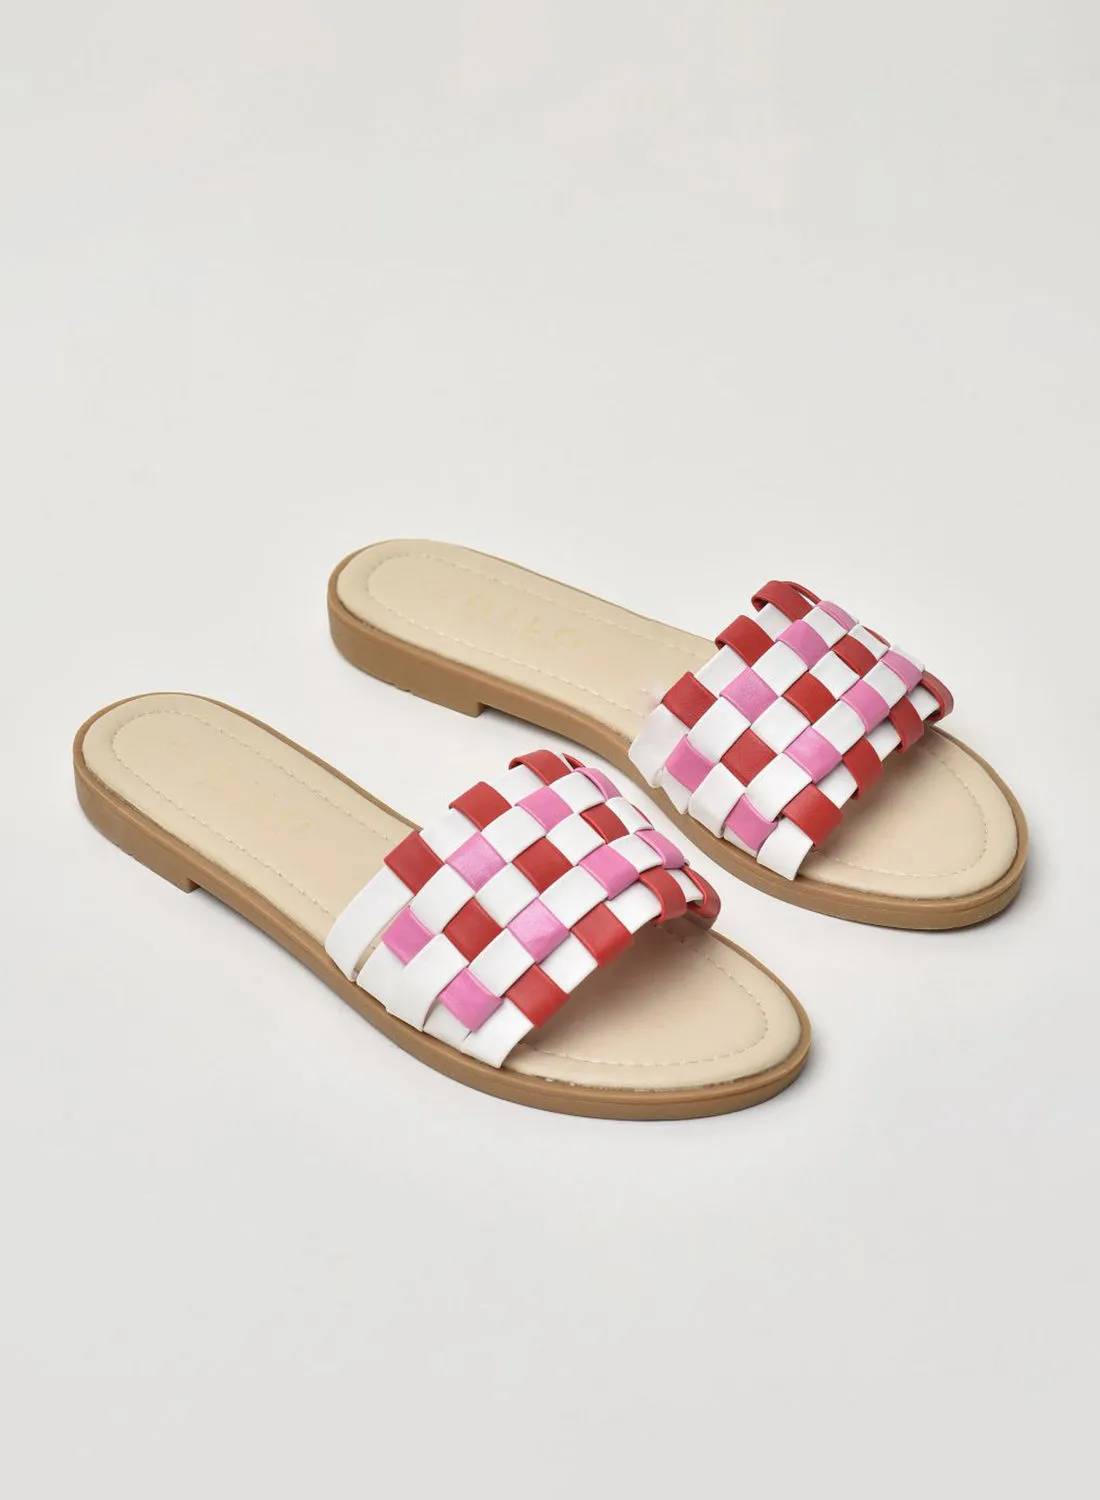 Aila Braided Straps multicolors Flat Sandals Pink/Red/White